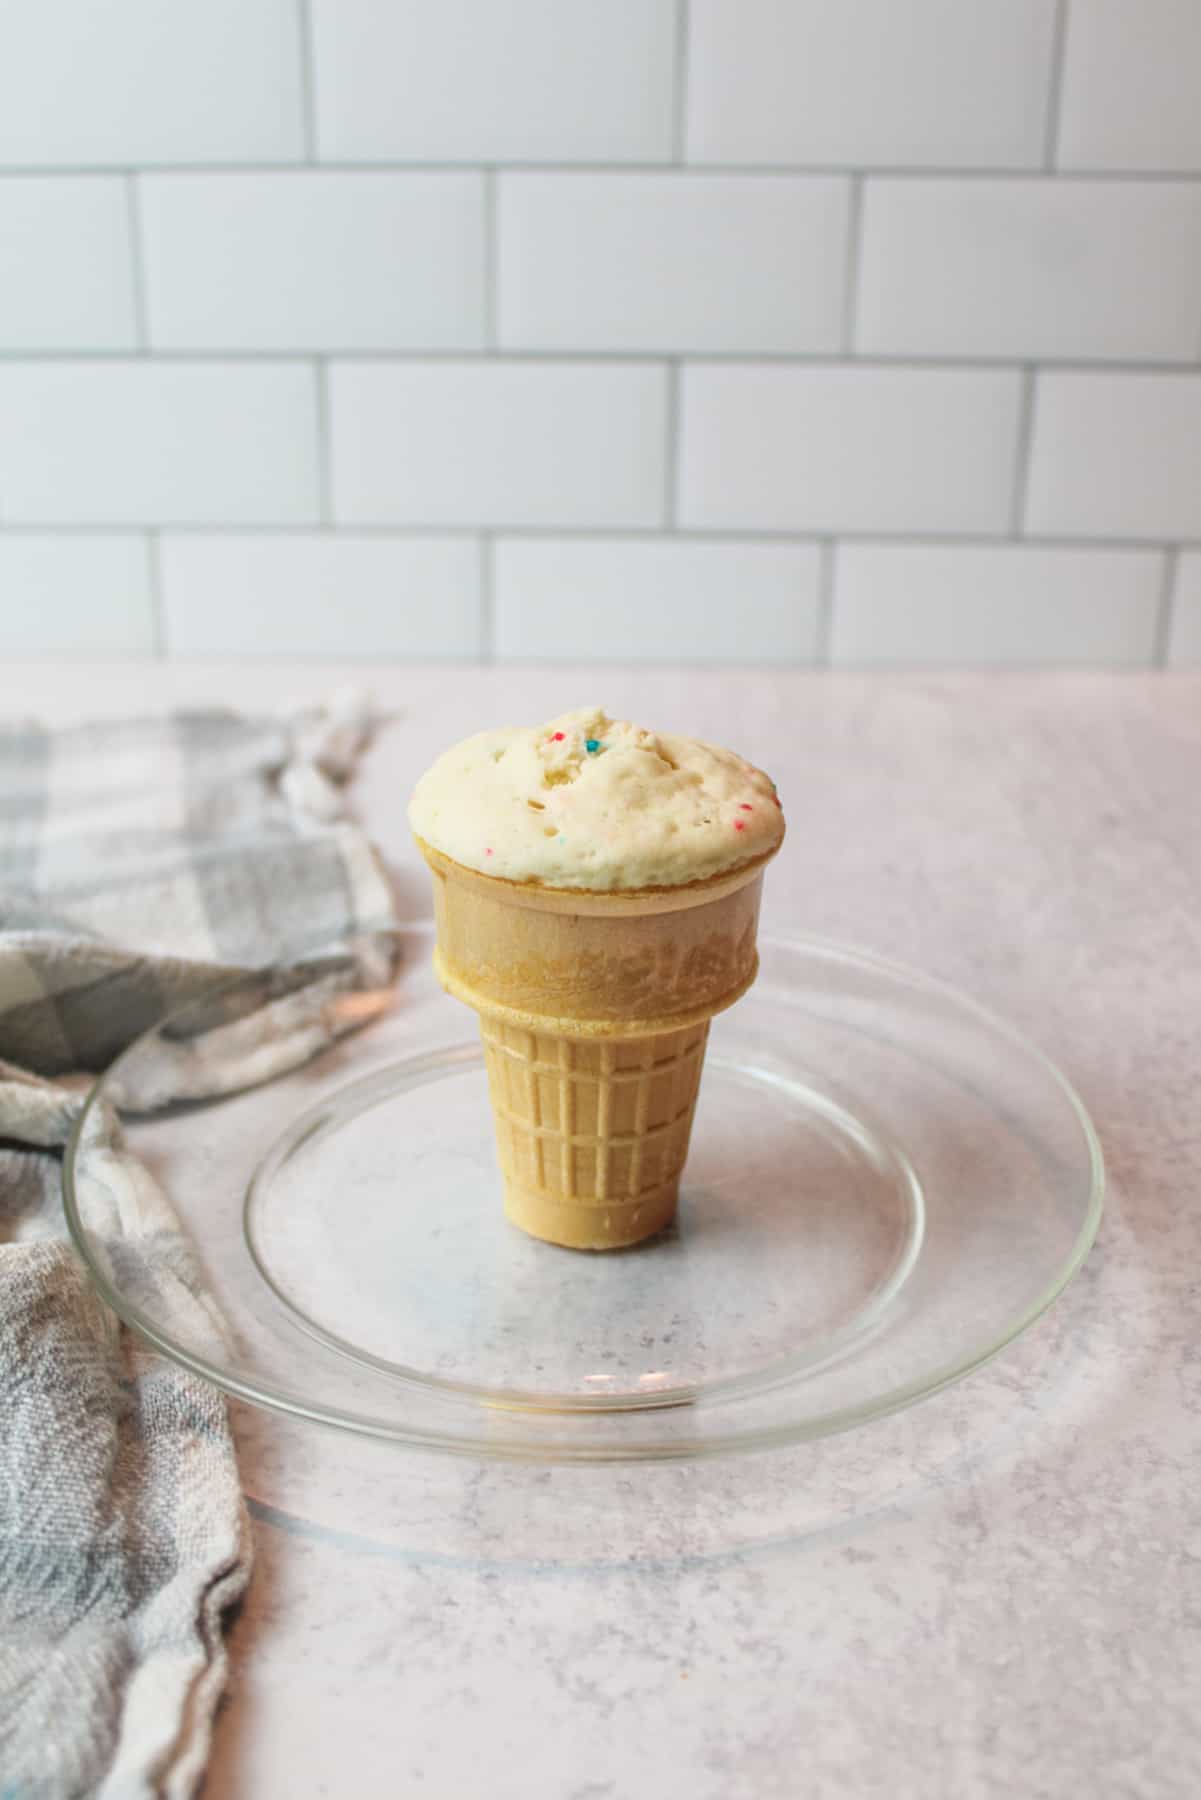 cooked microwave ice cream cone cupcake on a plate.